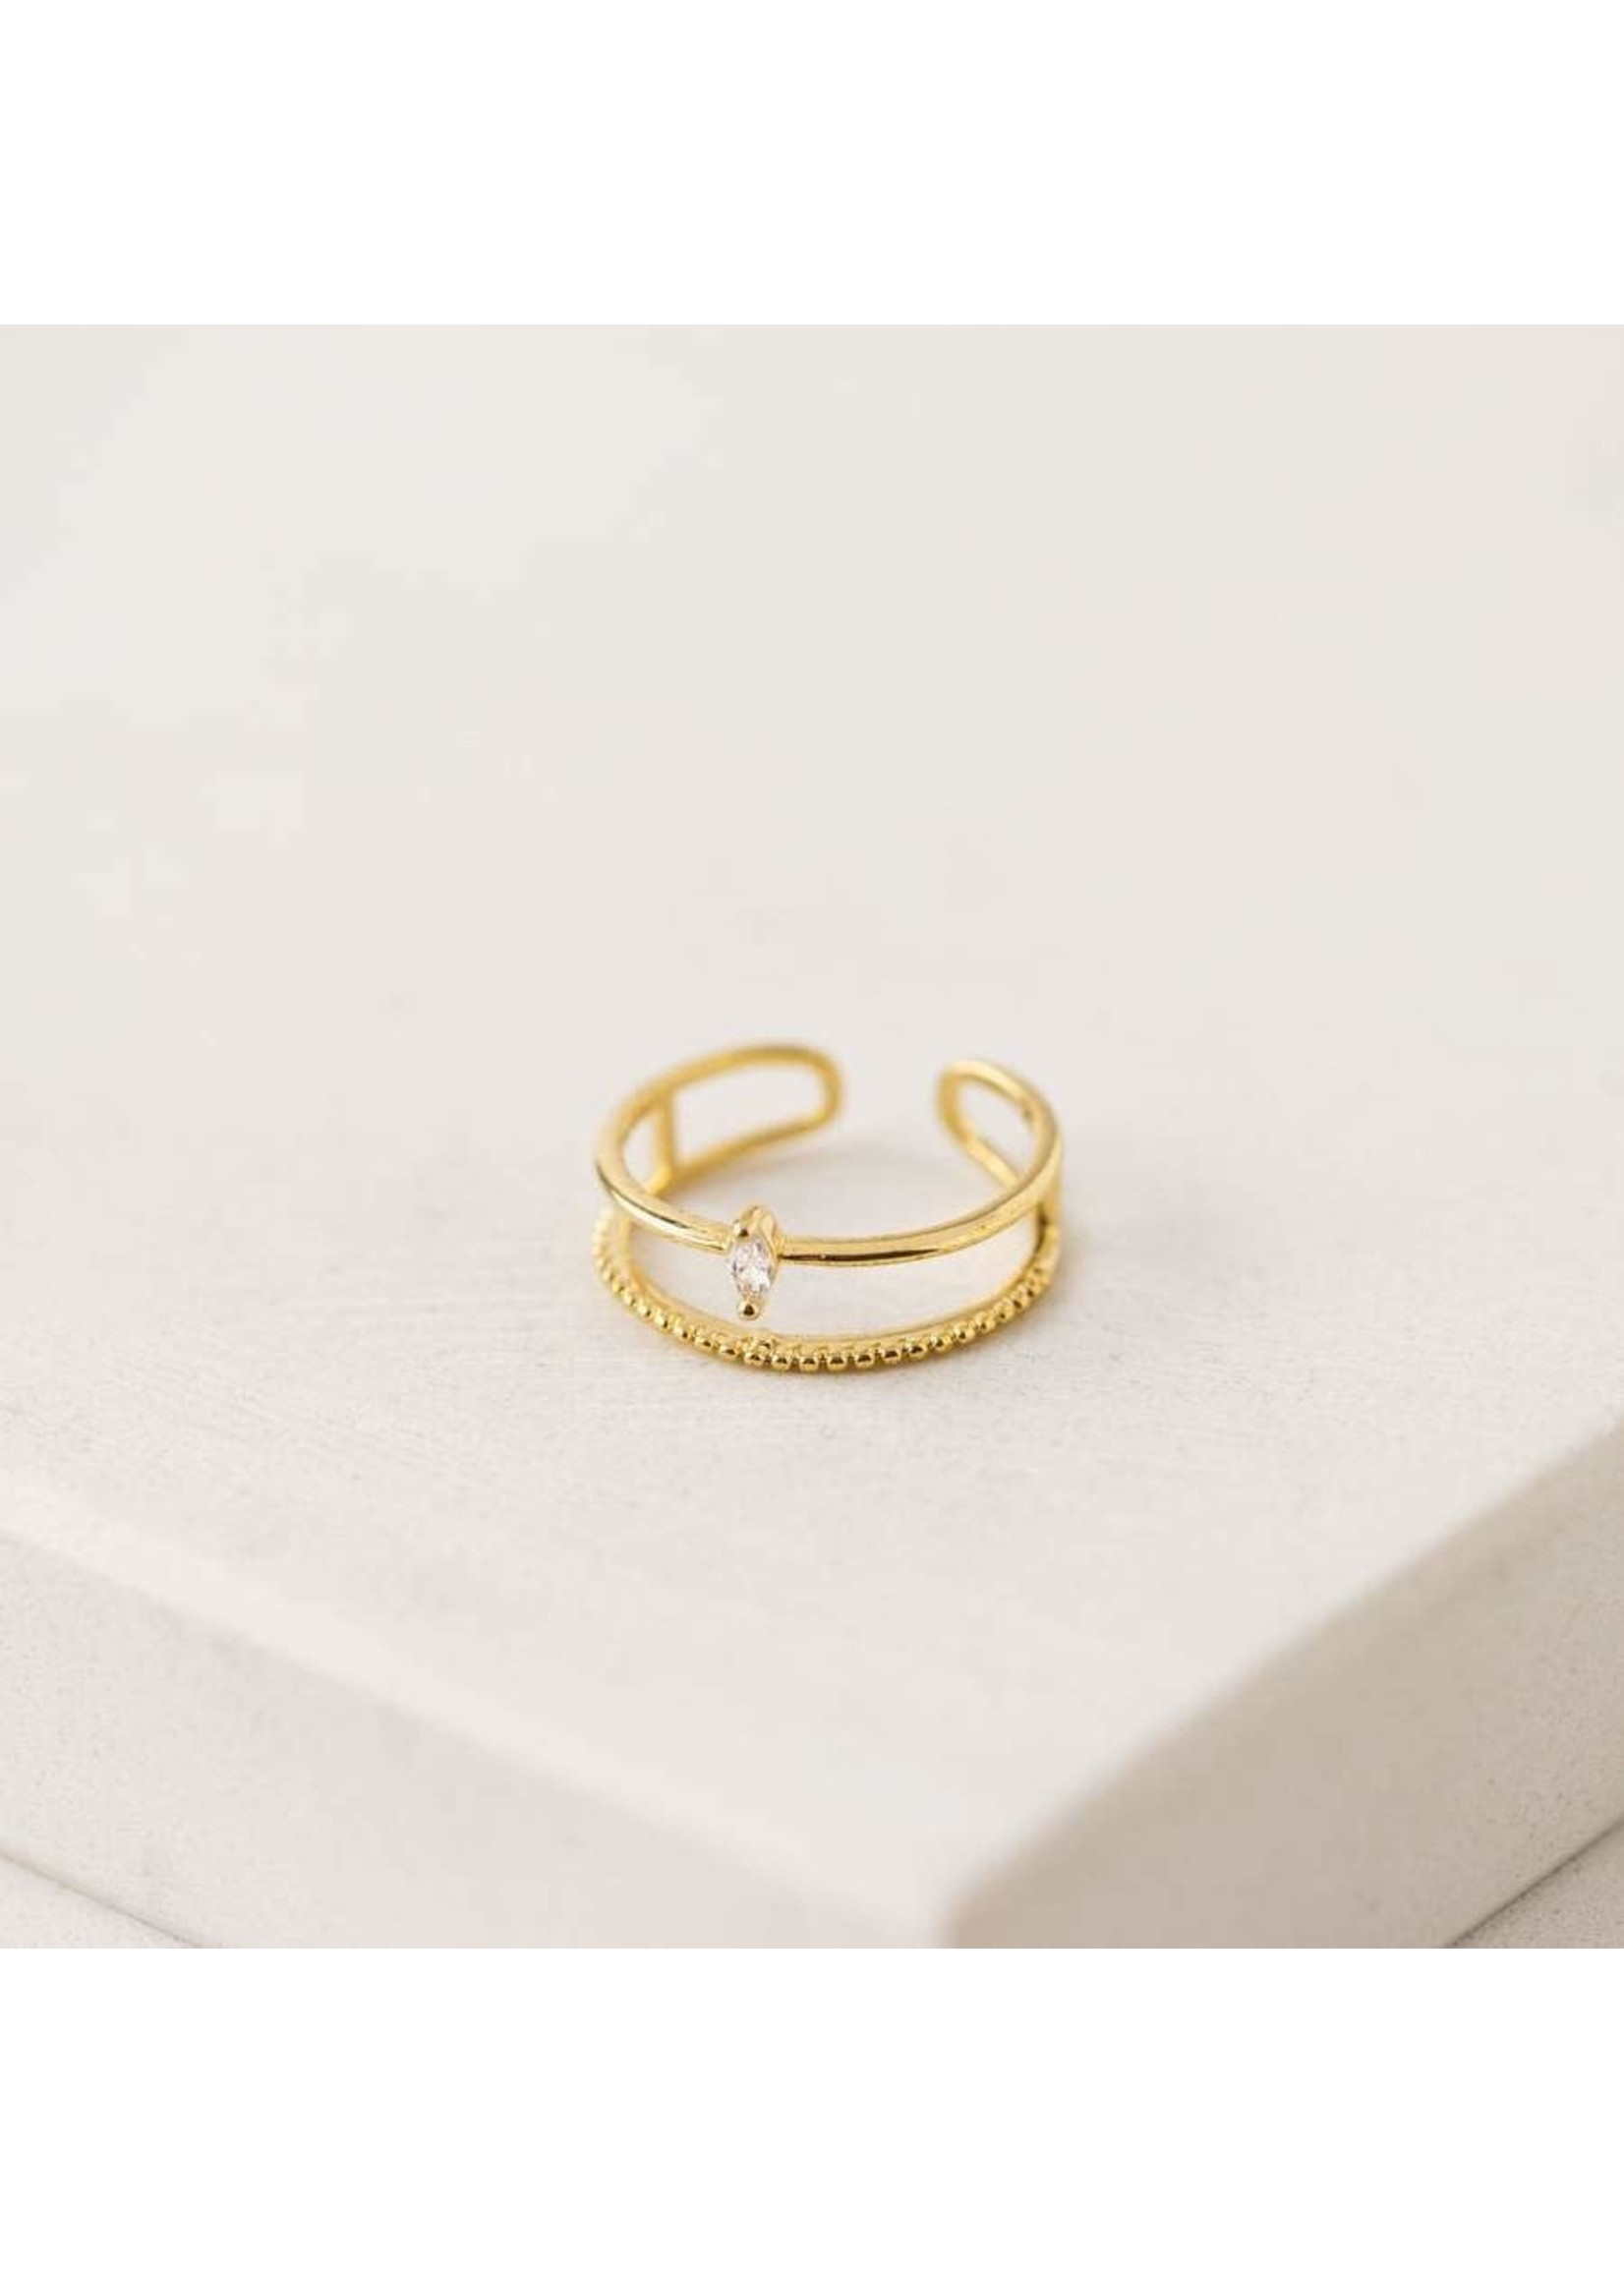 LOVER'S TEMPO MARQUISE RING- GOLD